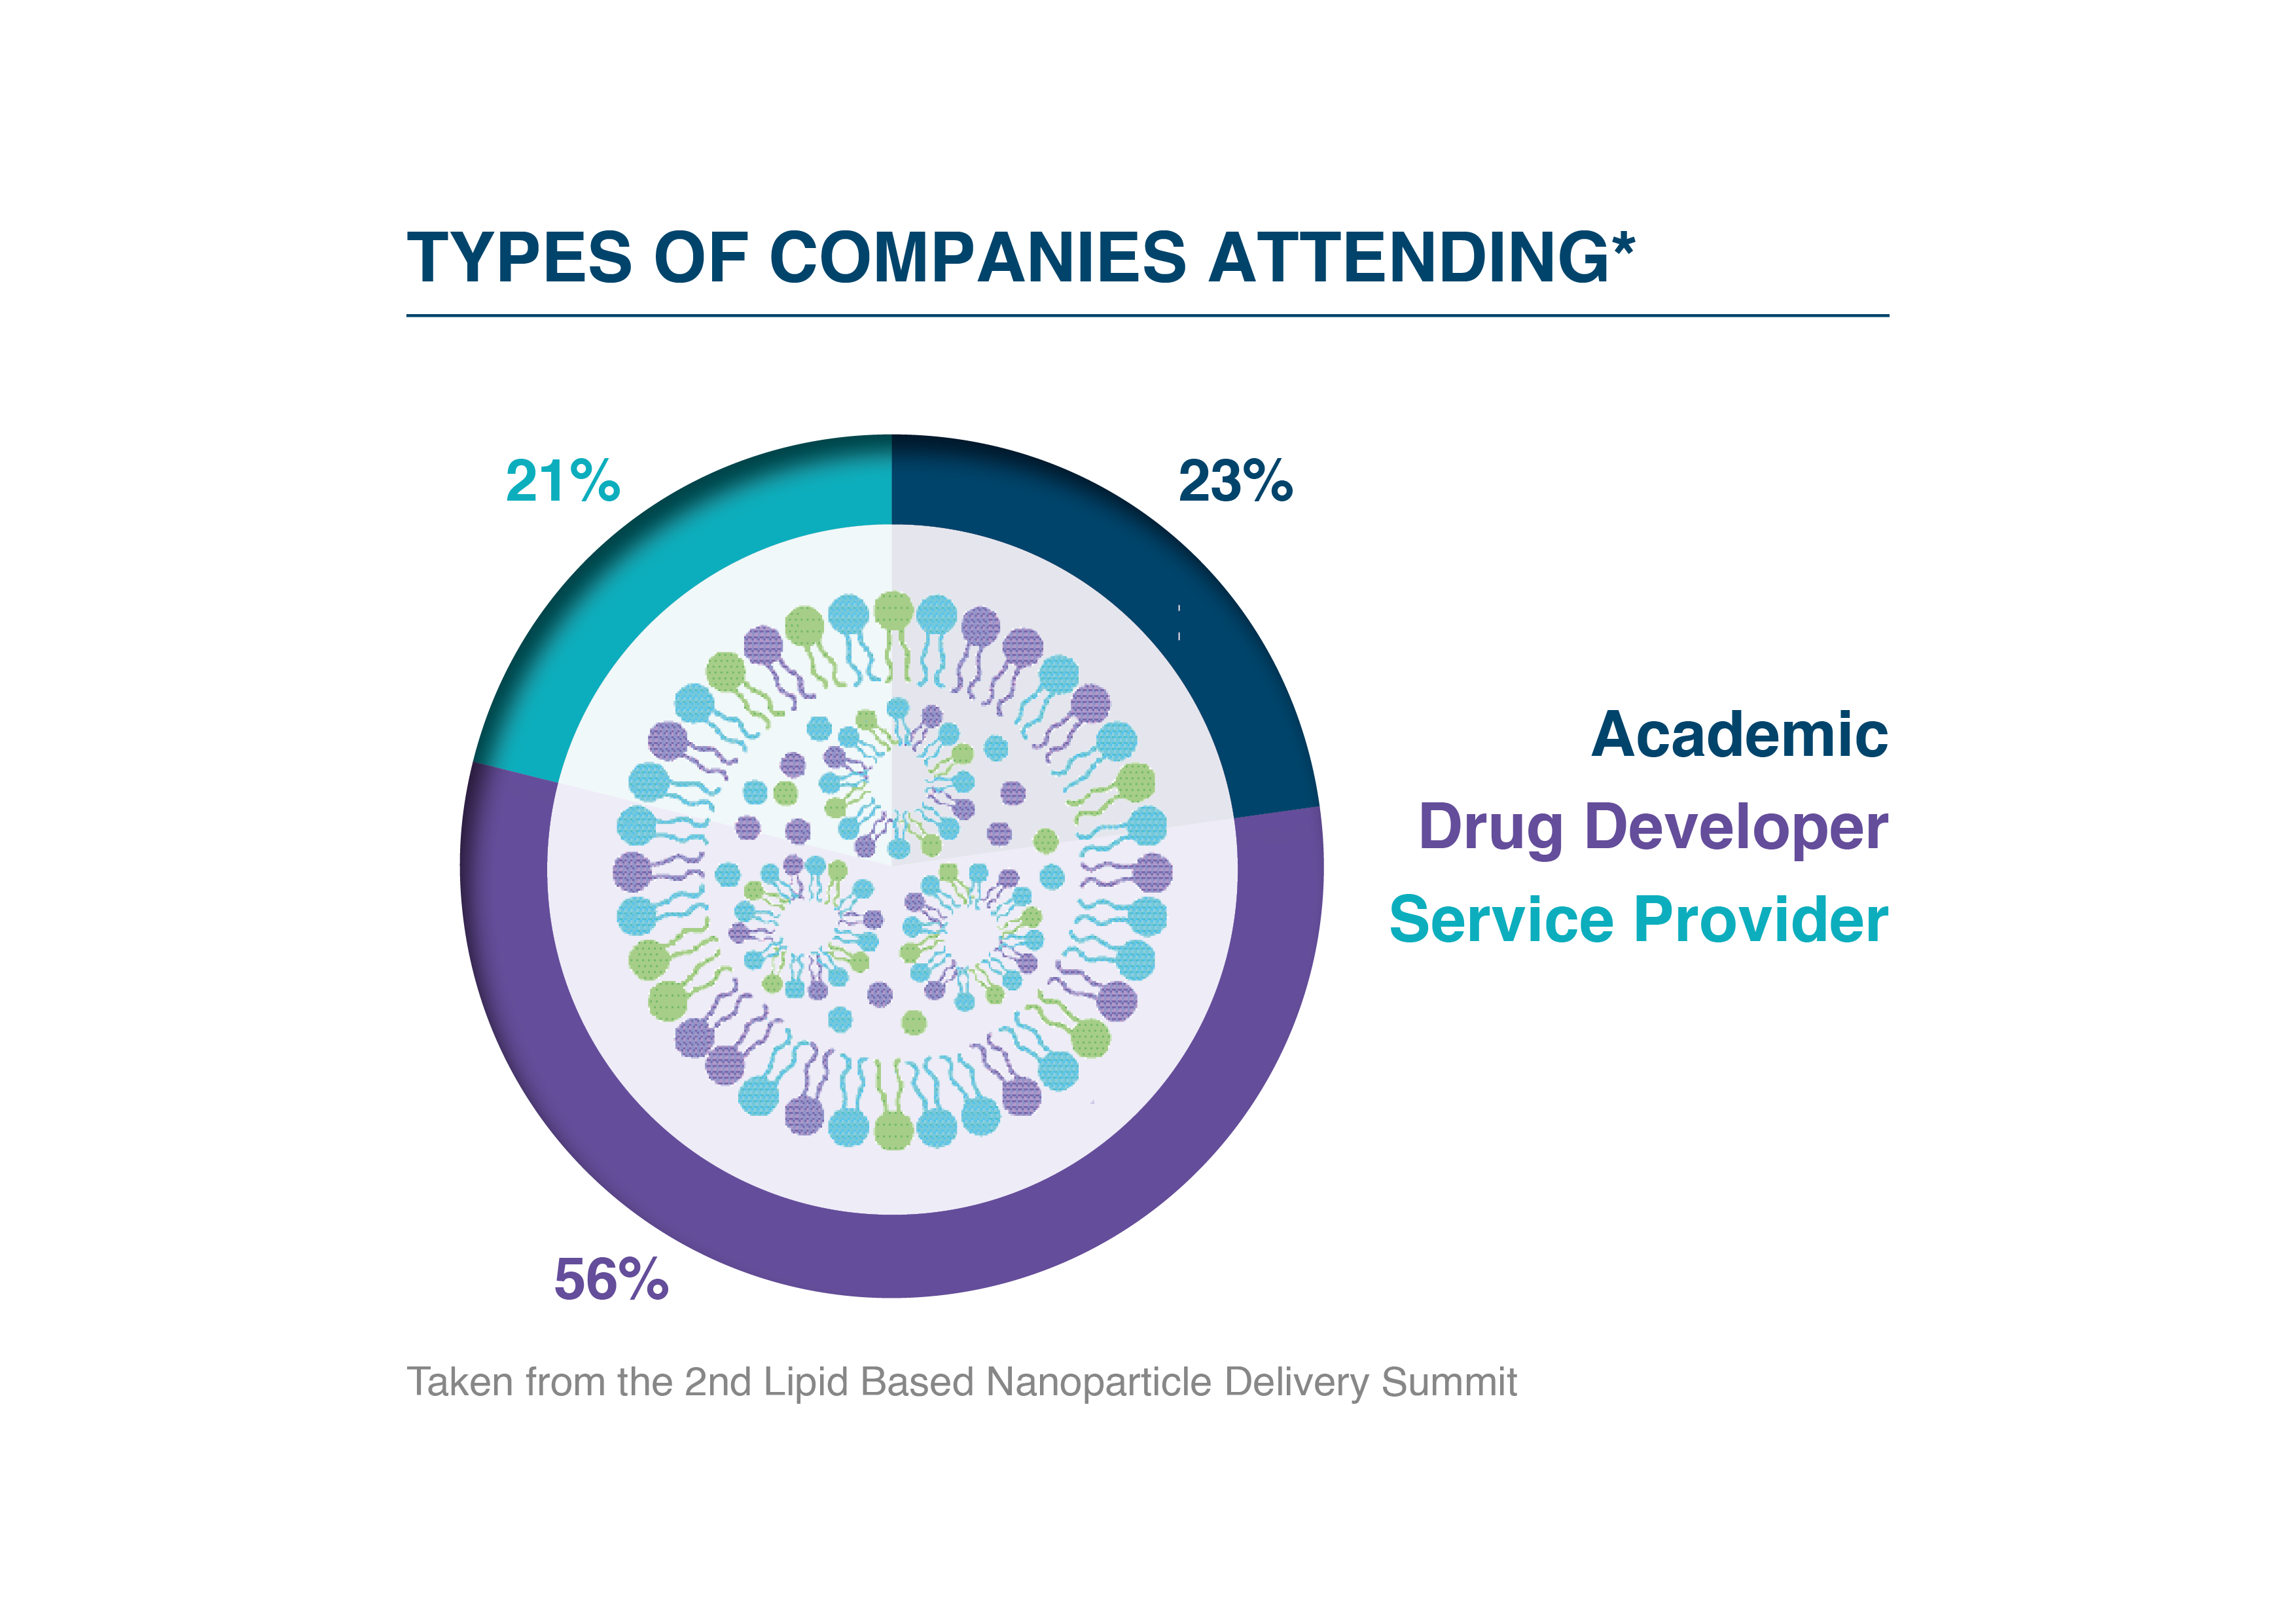 Types of Companies Attending